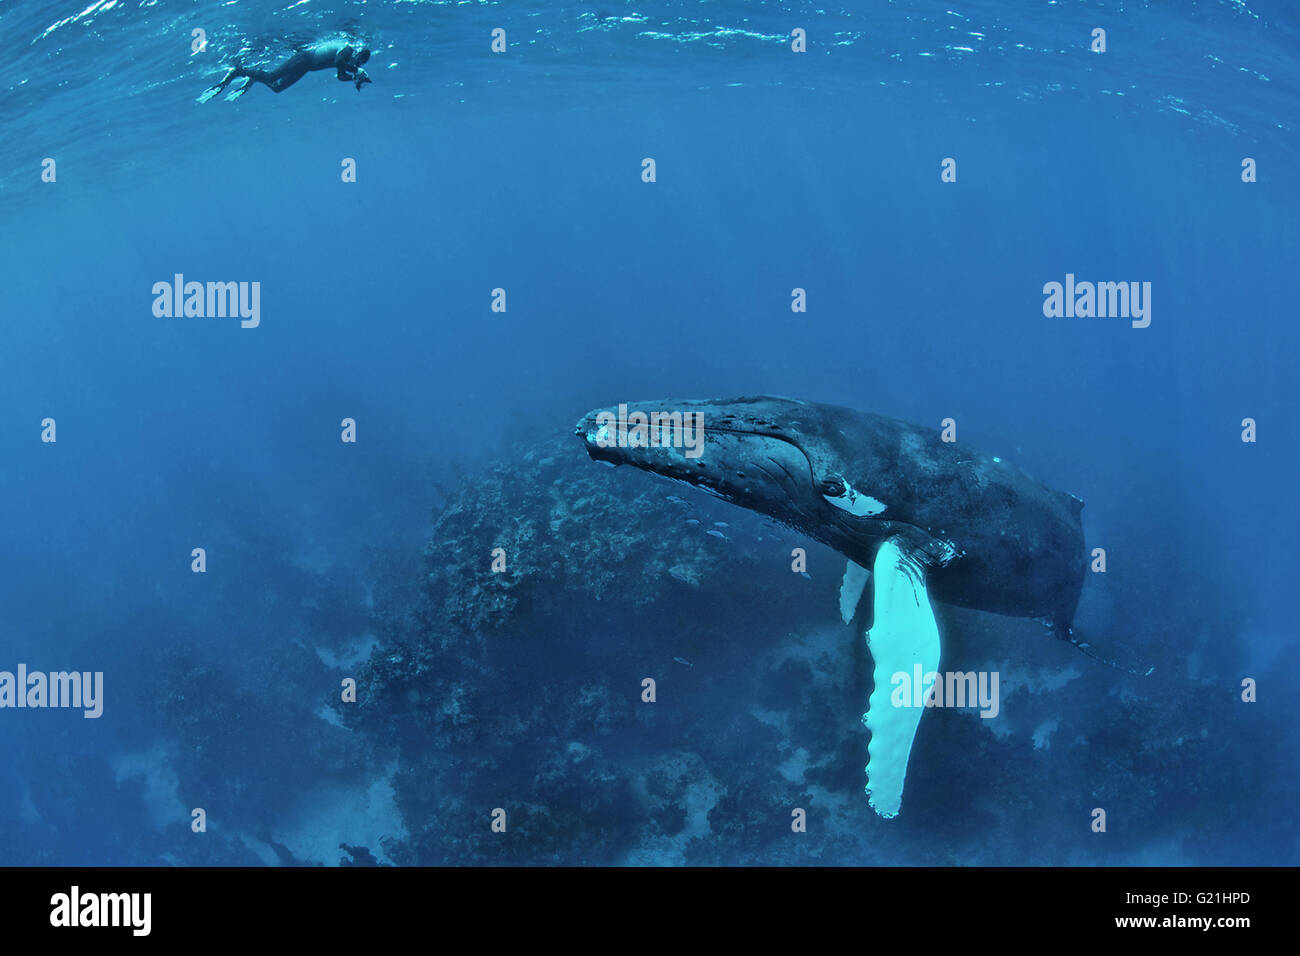 Humpback whale (Megaptera novaeangliae) with divers, Silver Banks, Dominican Republic Stock Photo